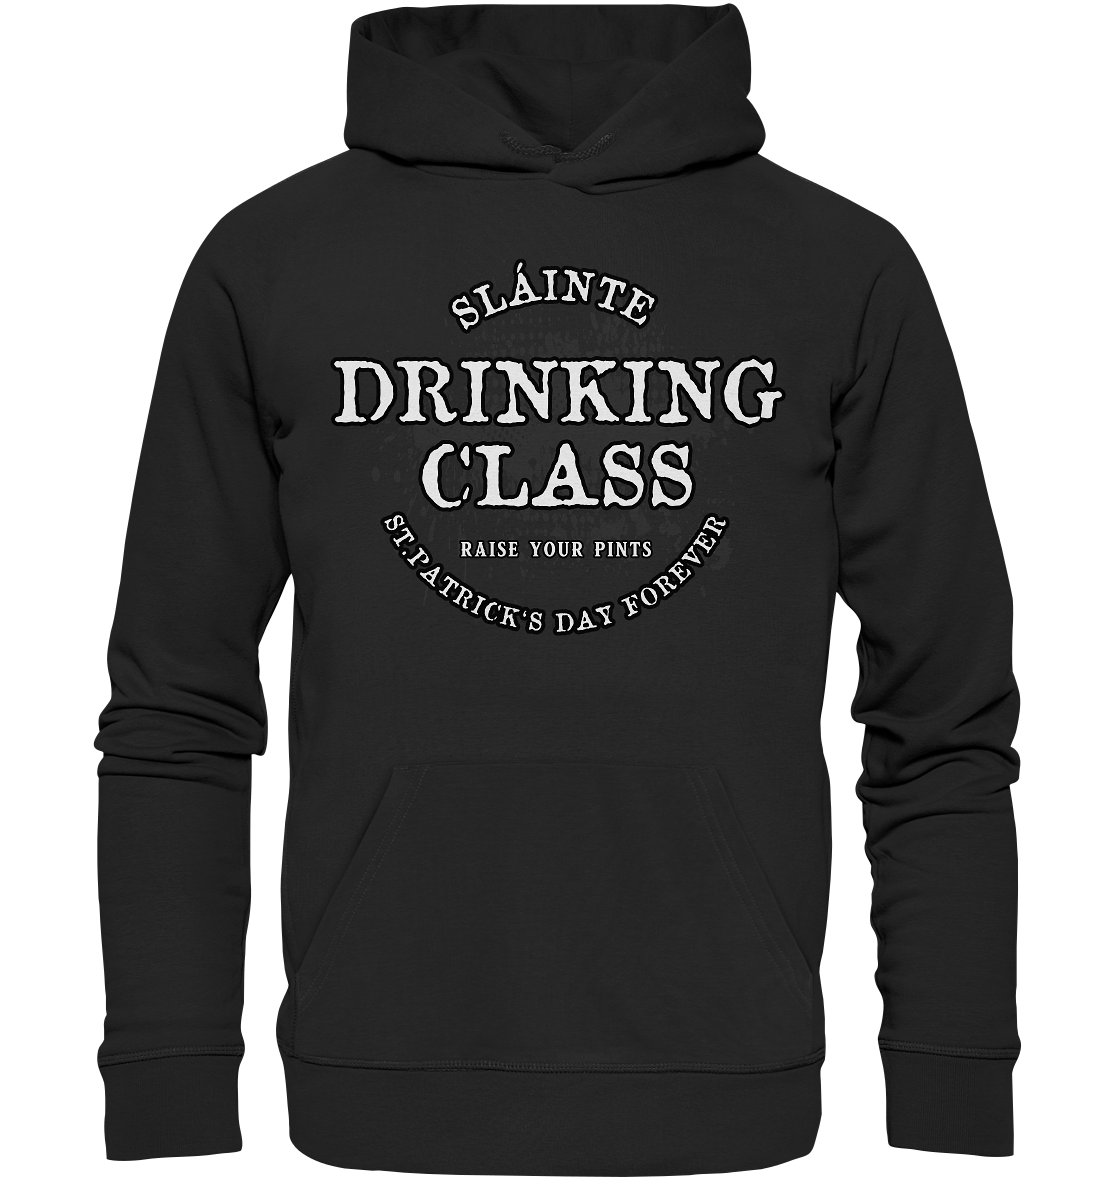 Drinking Class "St.Patrick's Day Forever" - Premium Unisex Hoodie